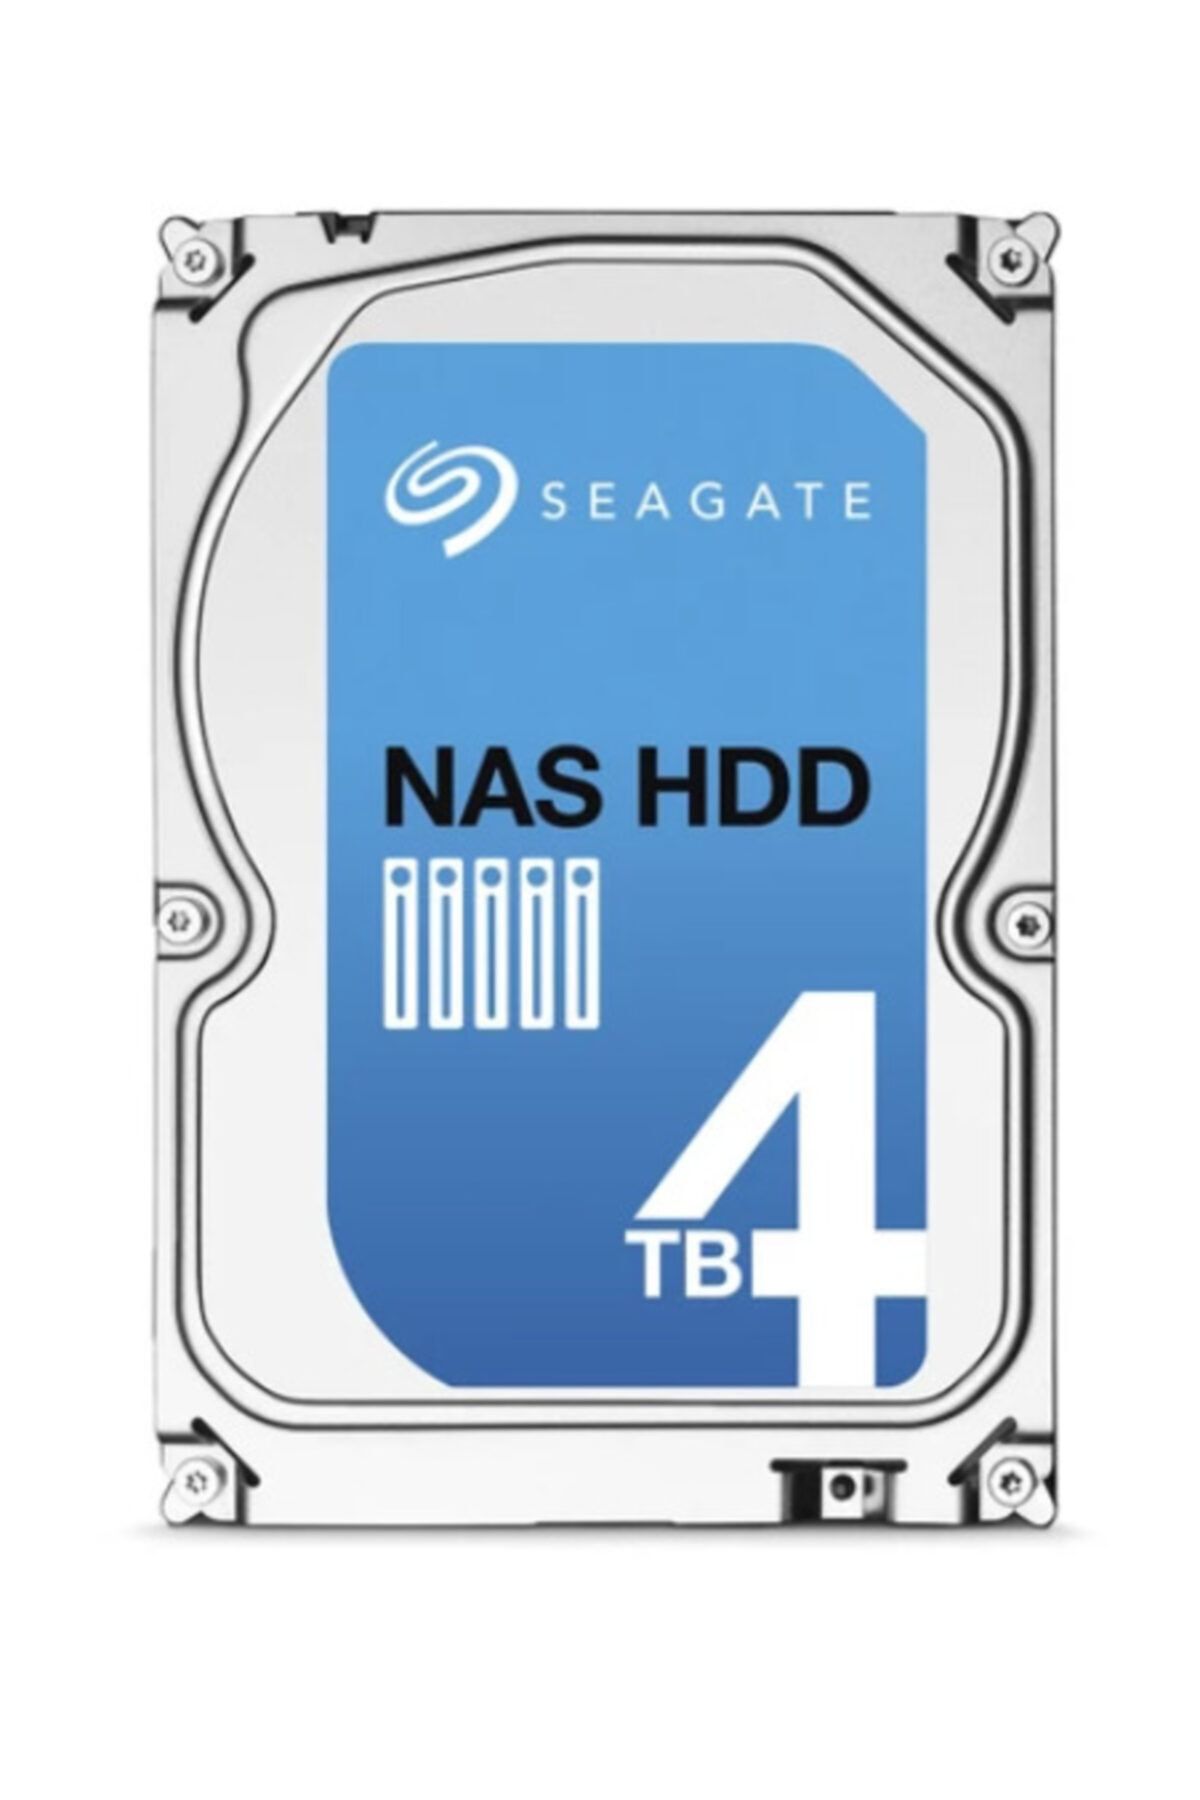 Seagate 4 Tb St4000vn000 64 Mb Cache 5900 Rpm Nas Hdd